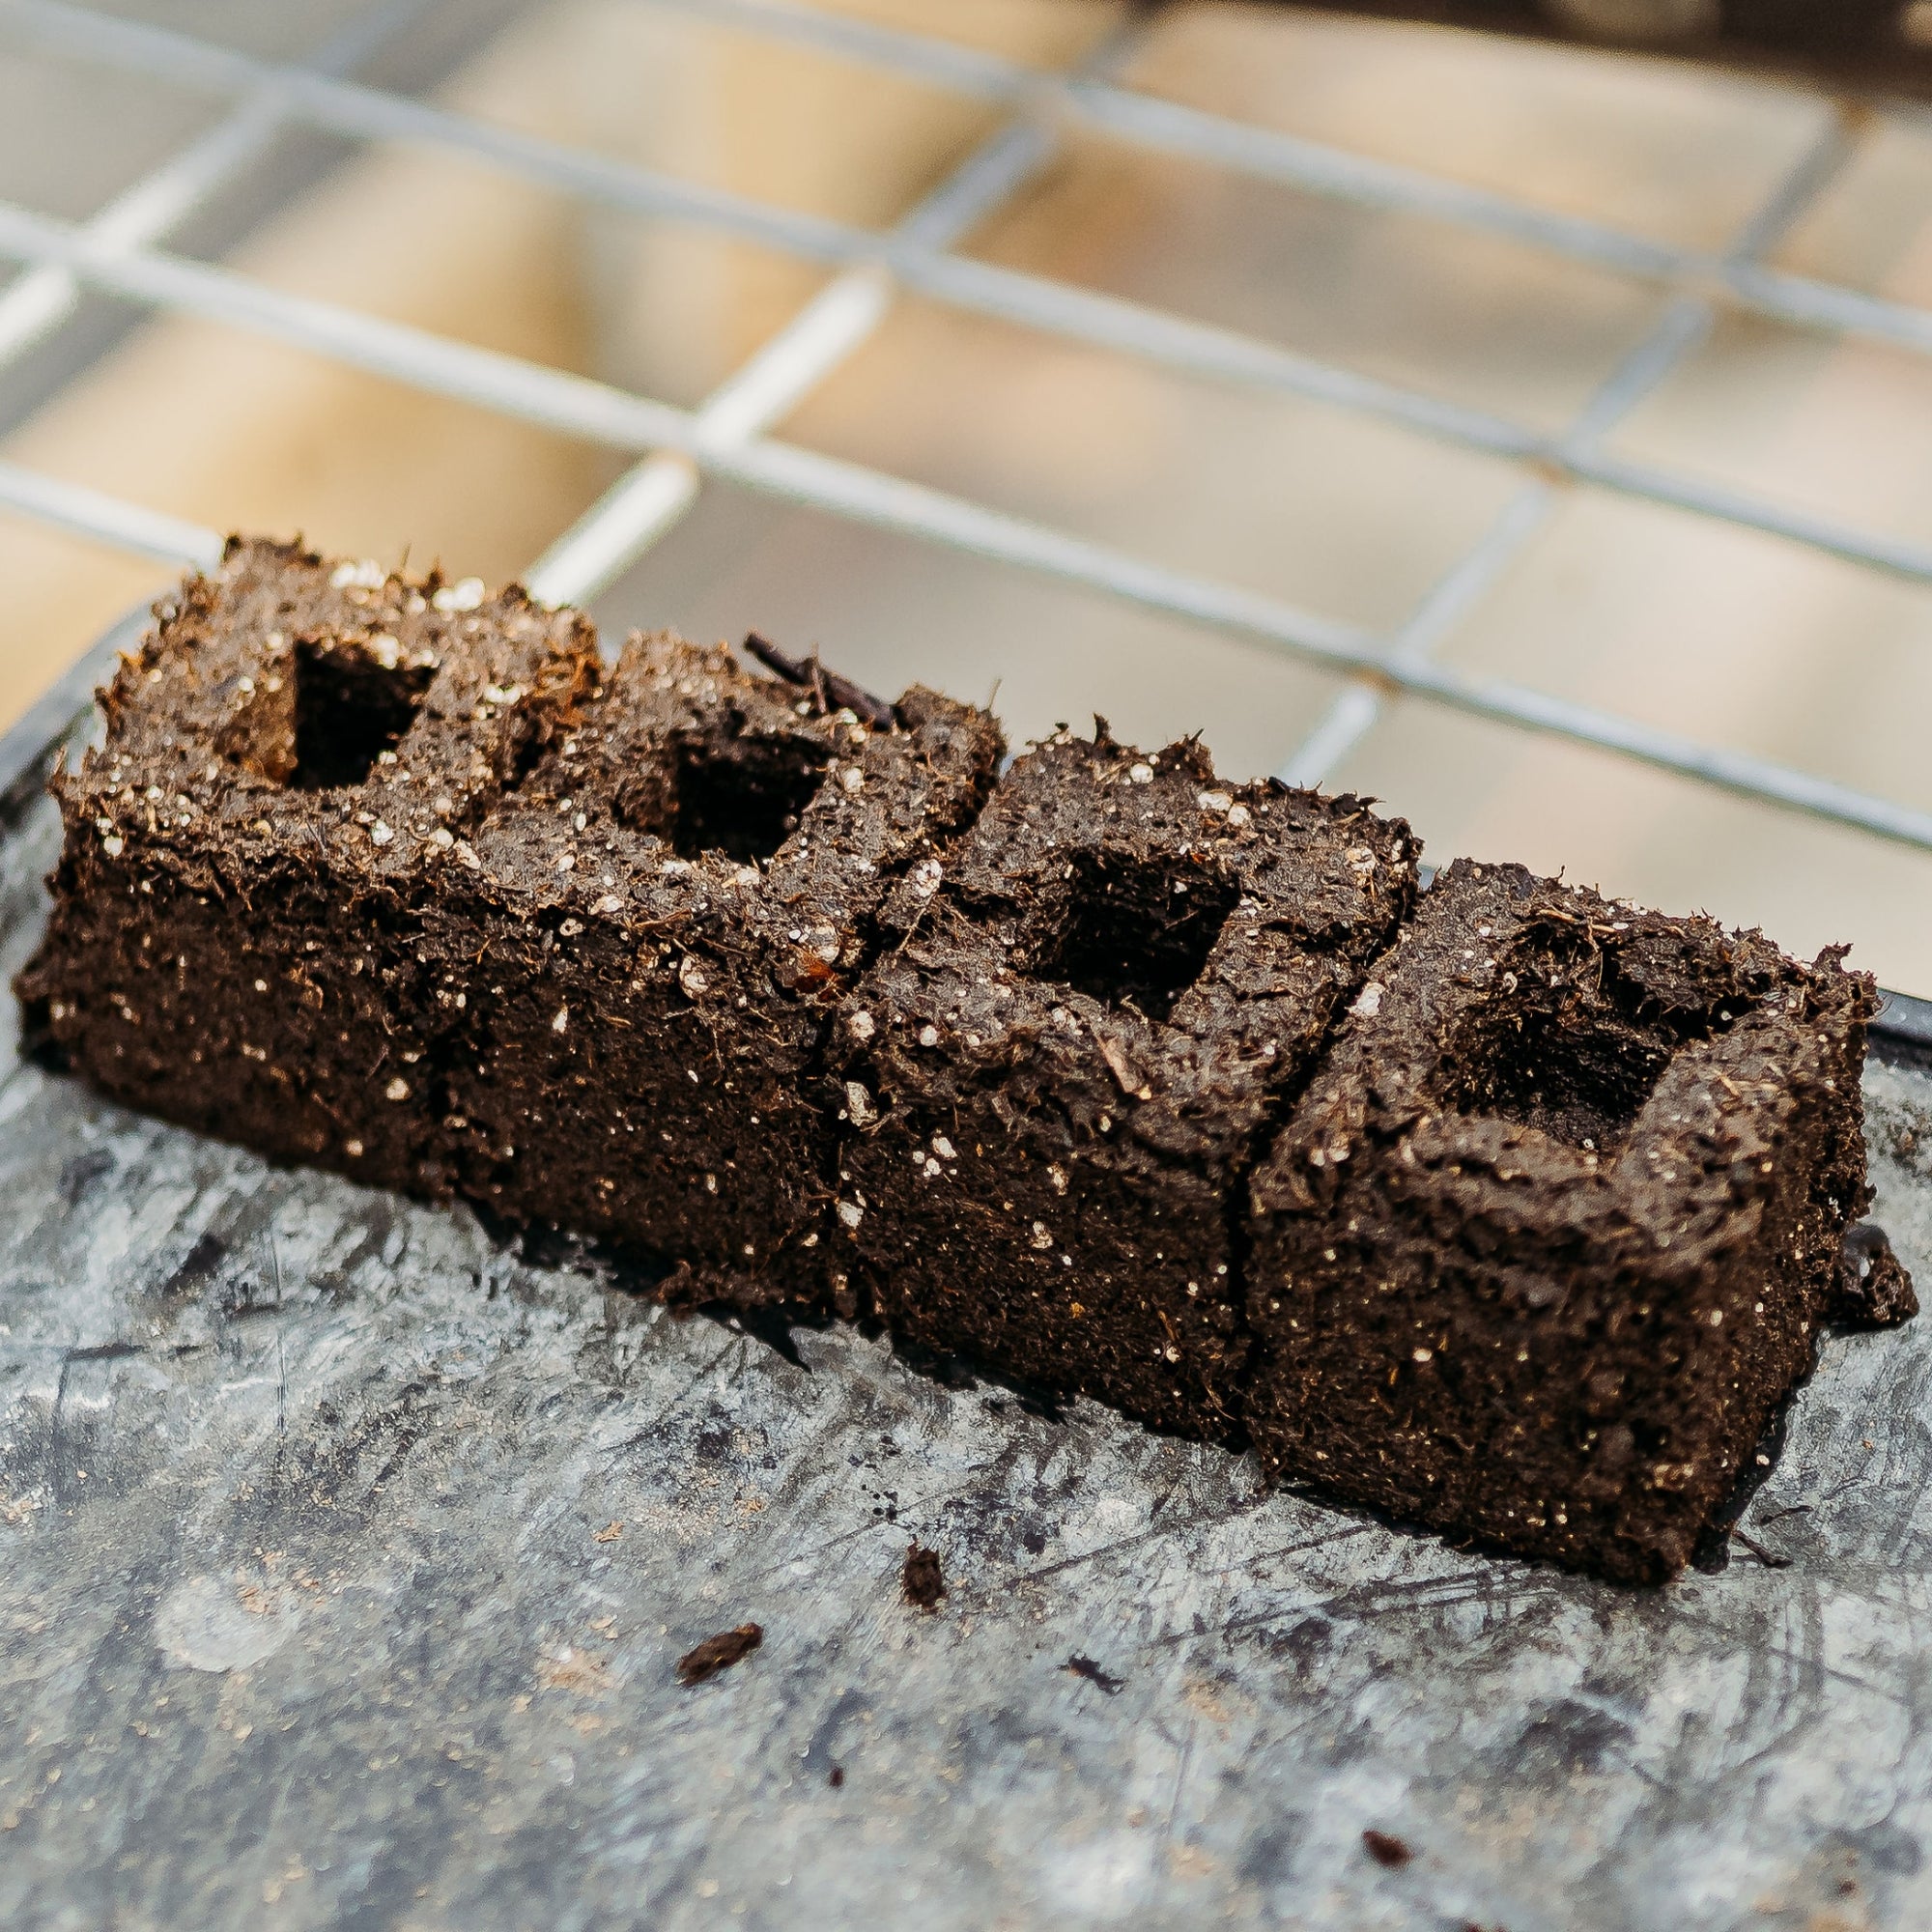 Soil Blocks with Cubic Cutout for Seedling